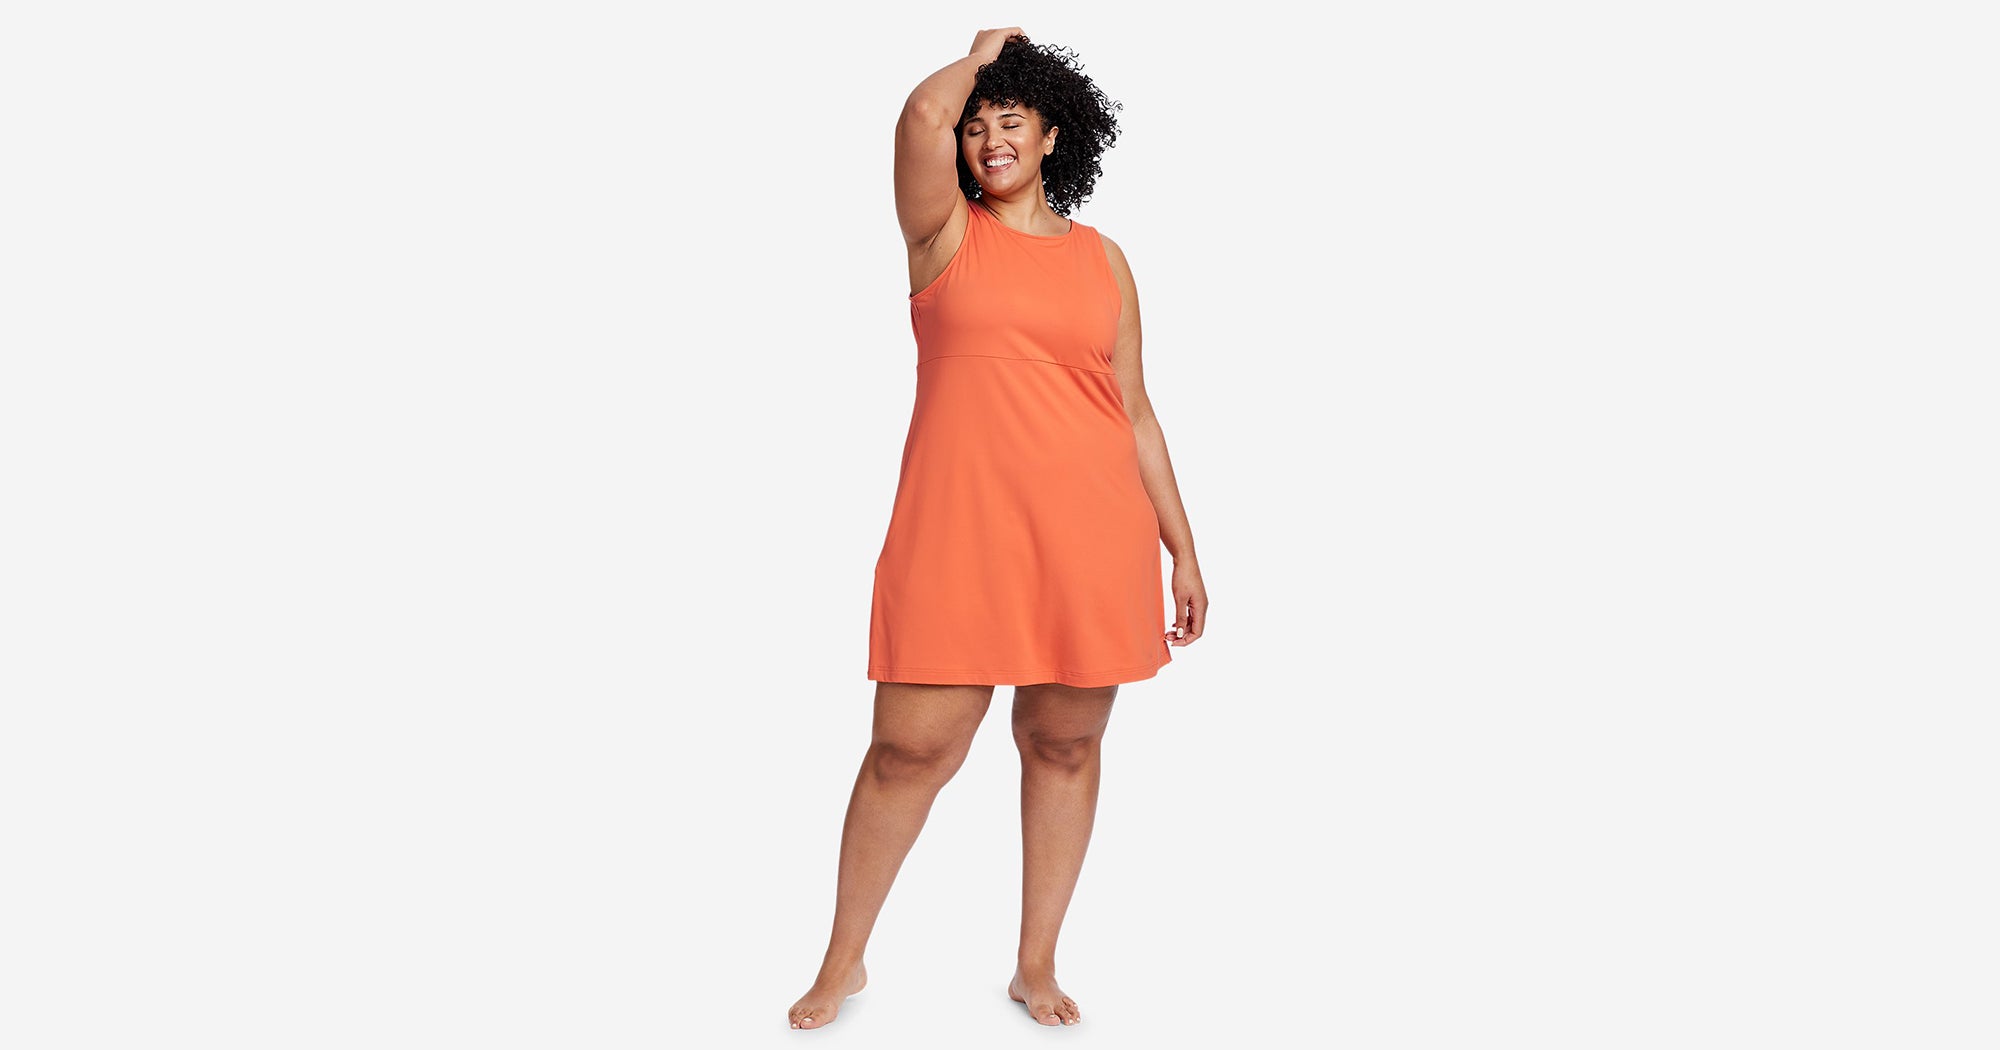 Comfy Size Inclusive Essentials From Universal Standard